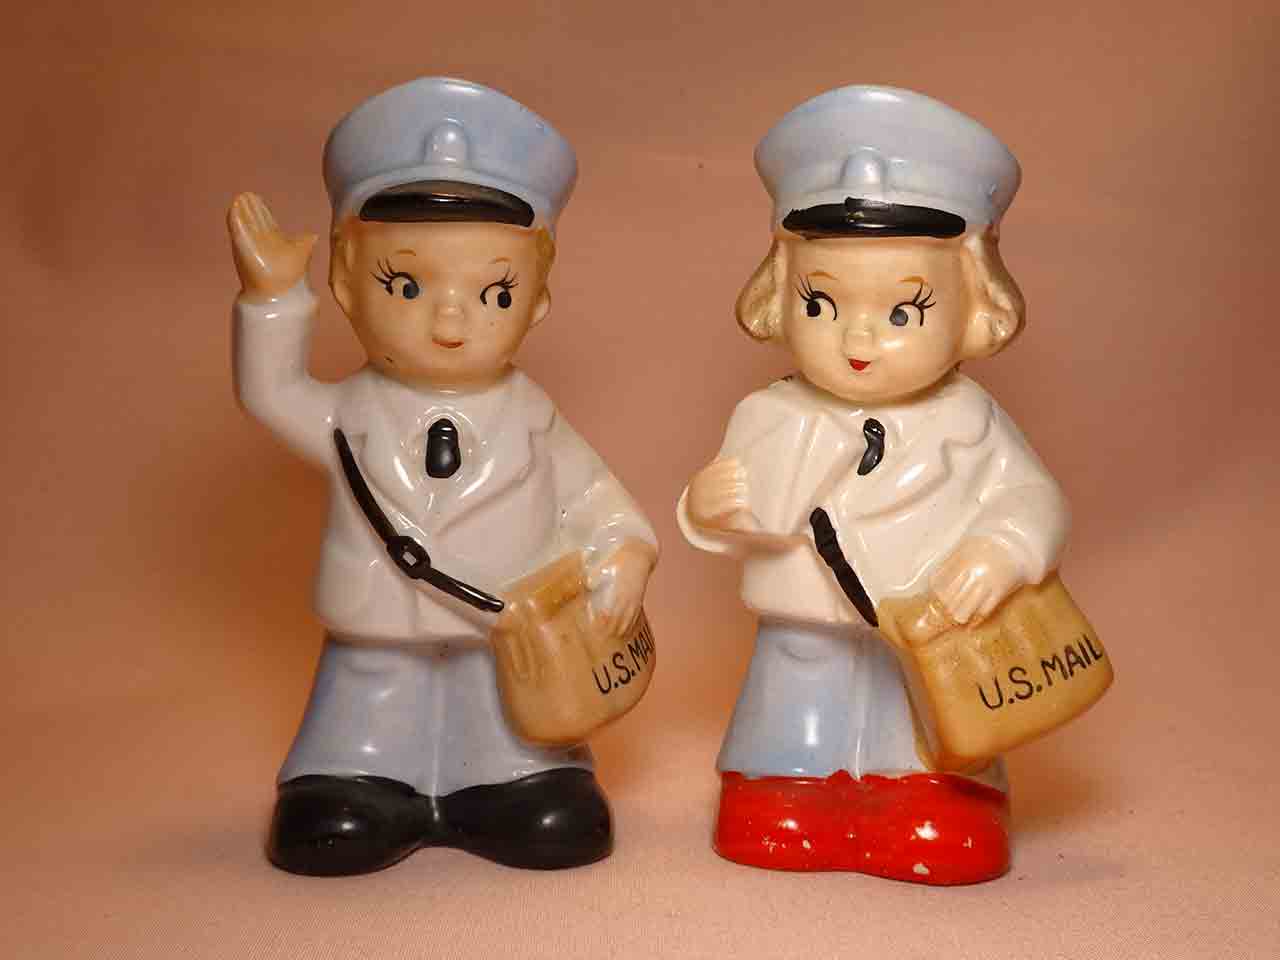 Lego Japan children dressed as various occupations salt and pepper shakers - mailman